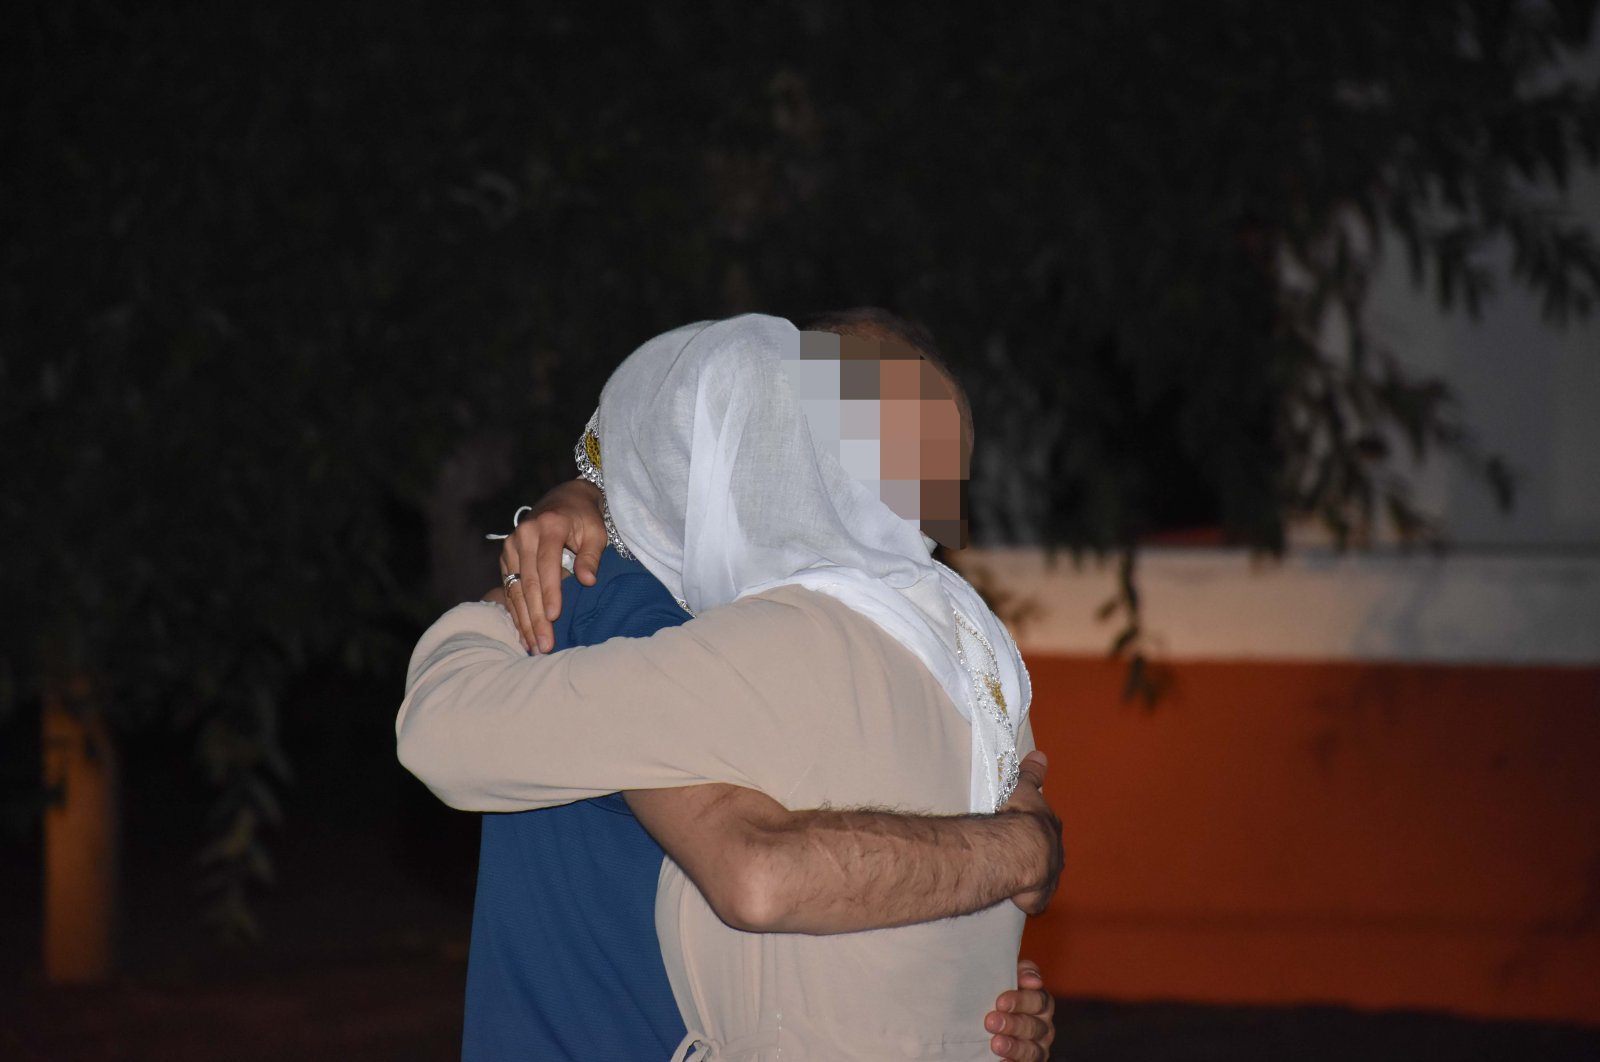 M.Ö., a former terrorist member who was tricked into joining the PKK, surrendered to security forces in Mardin, southeastern Turkey, Aug. 3, 2020 (AA Photo)